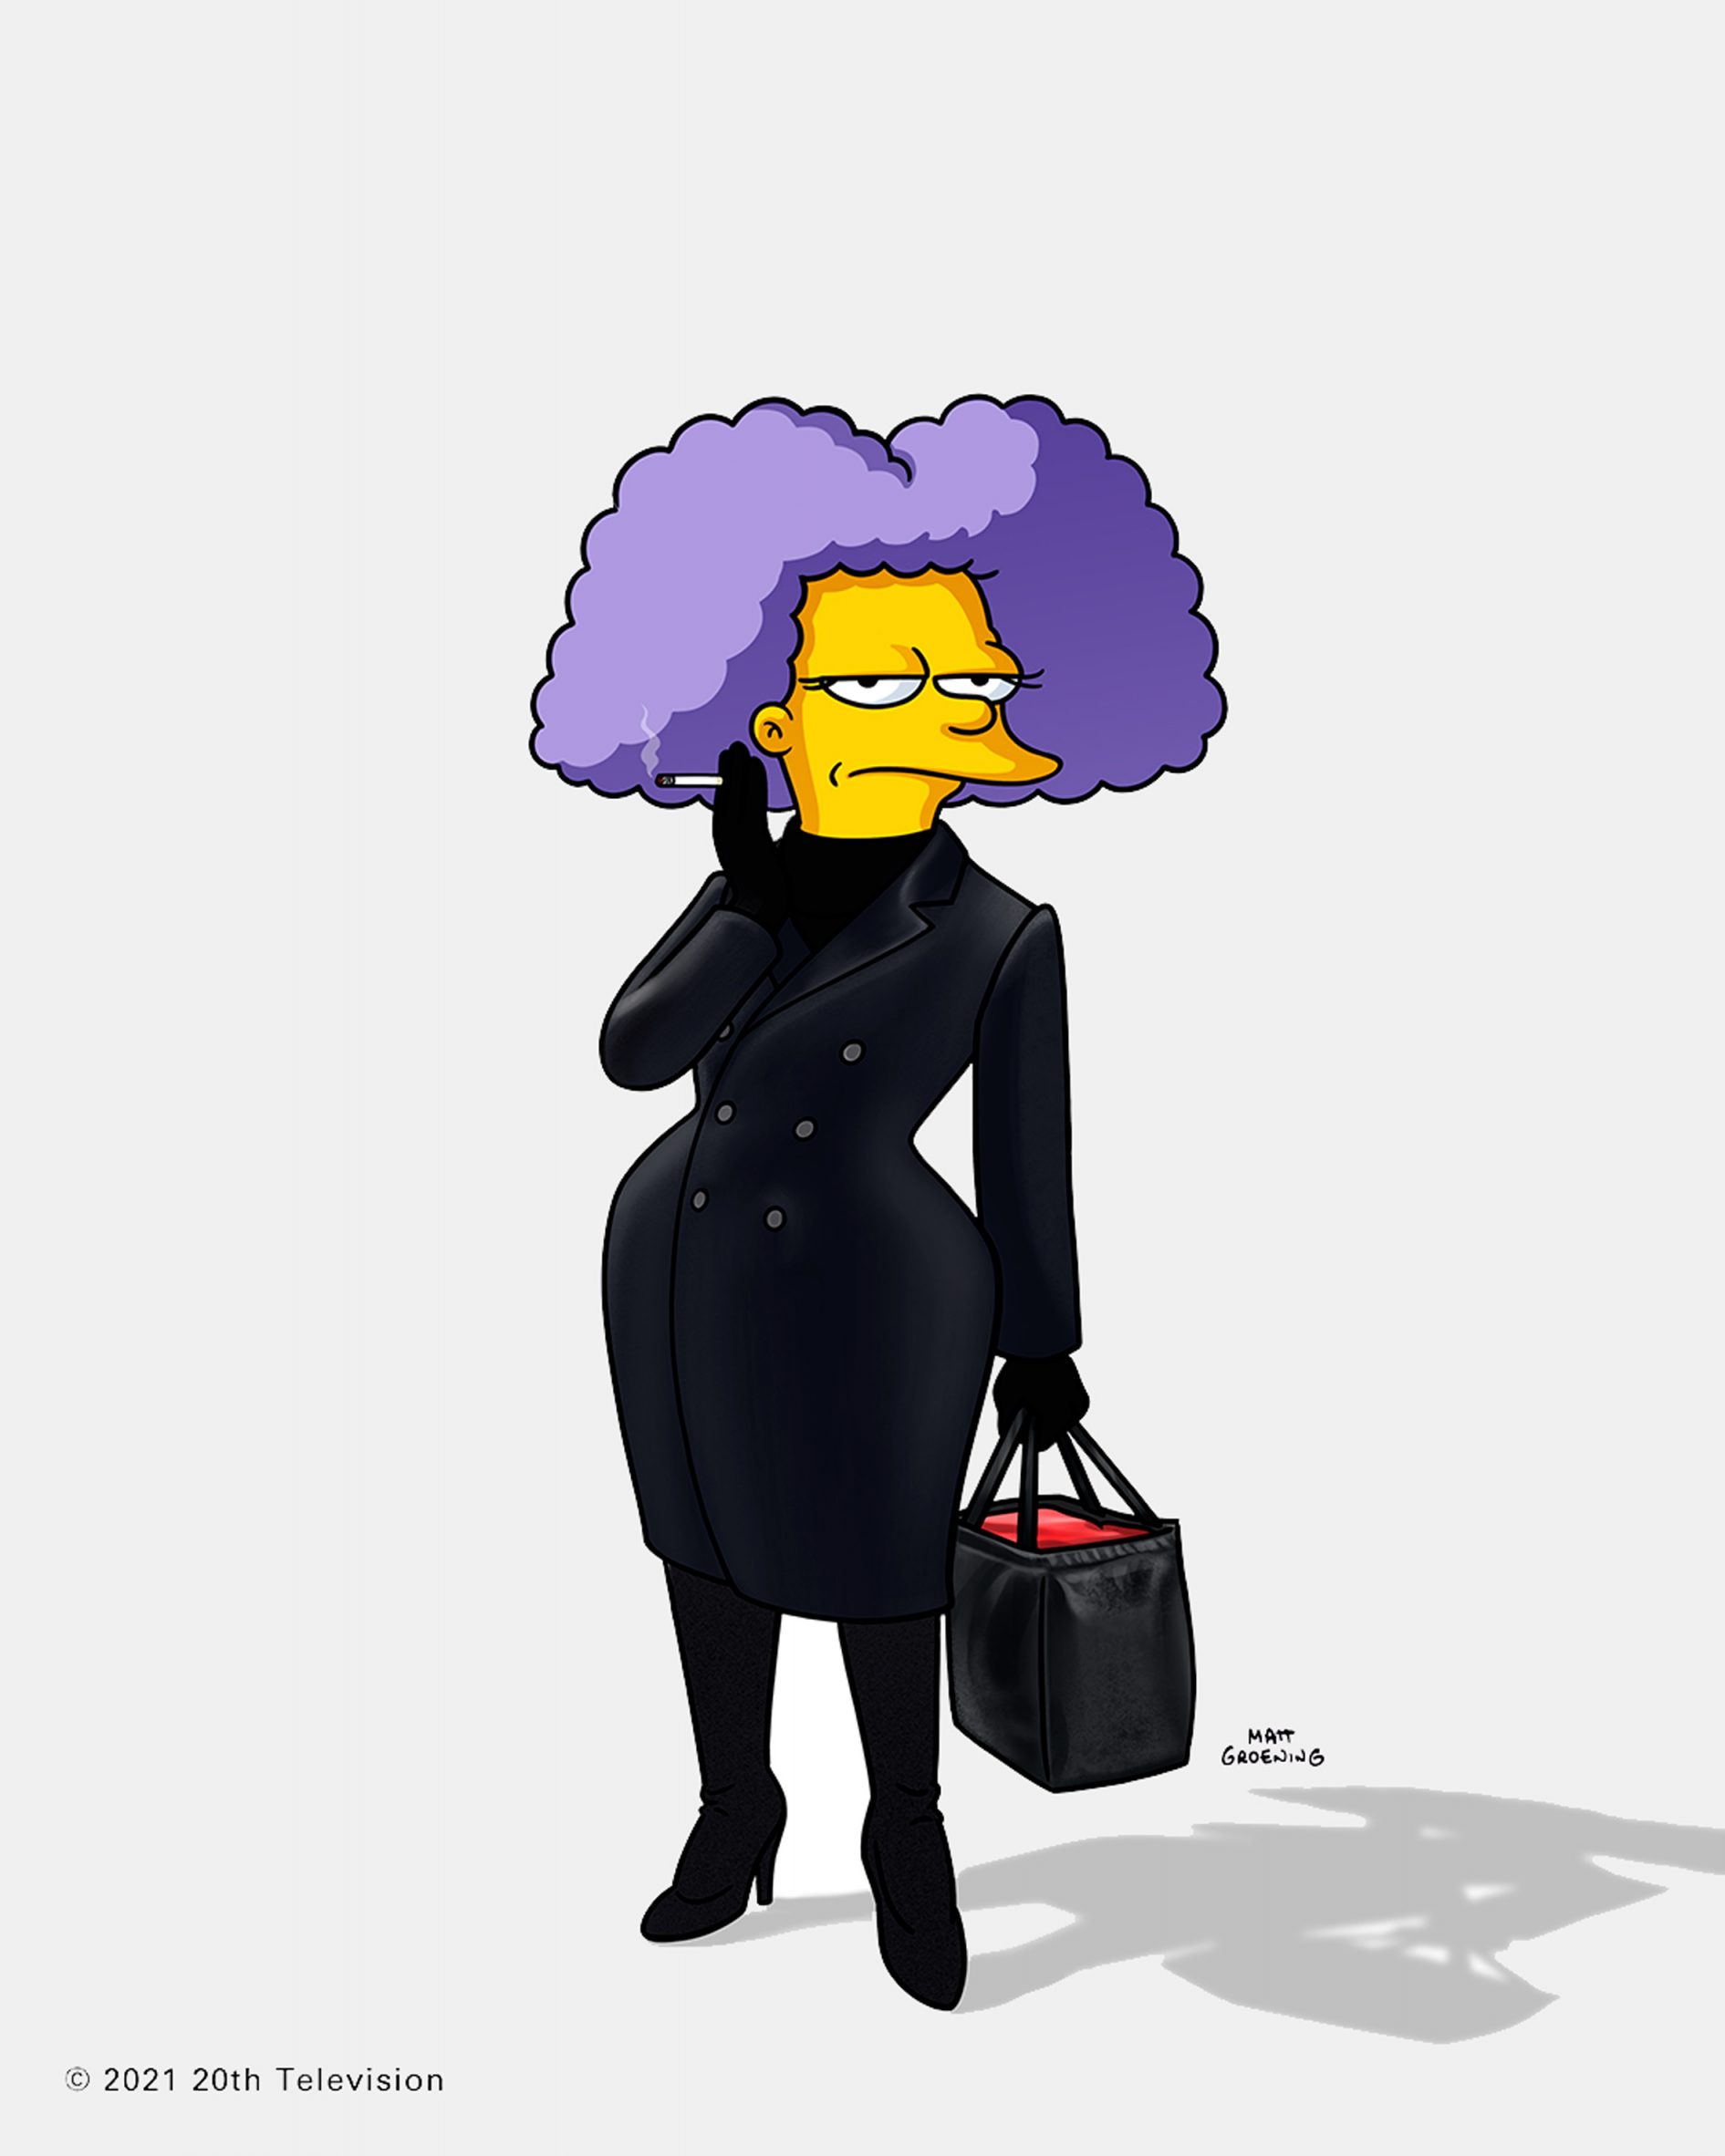 A simpsons character was animated wearing a black outfit from a previous balenciaga show